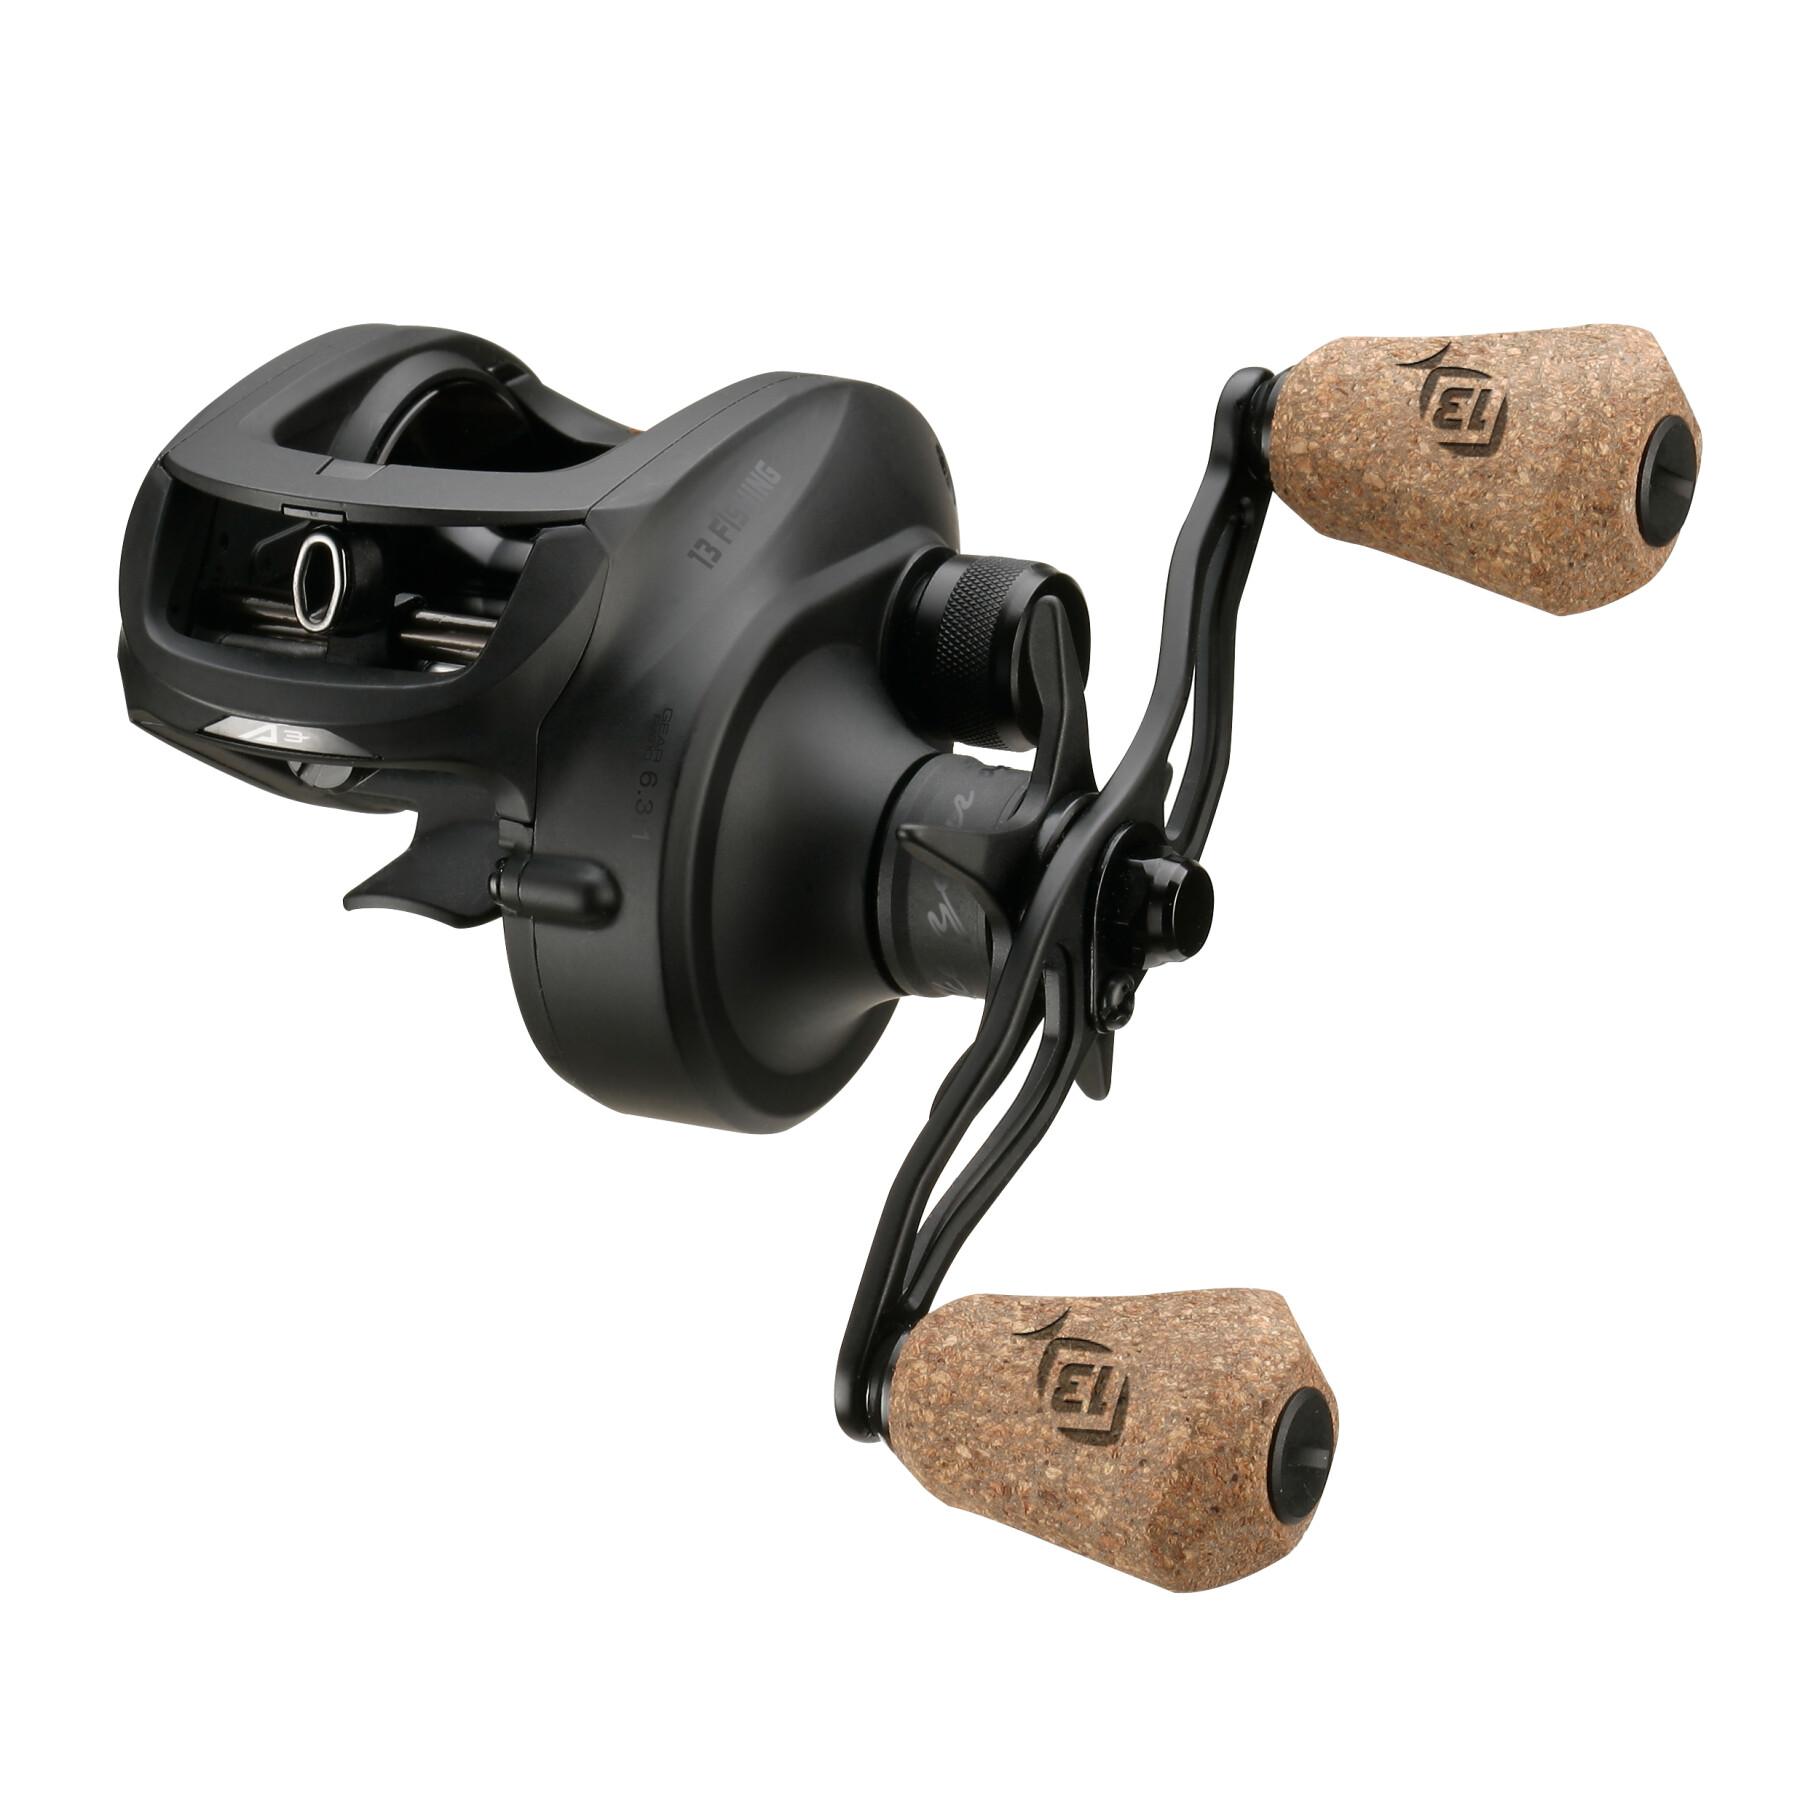 Reel 13 Fishing Concept A3 - 5.5:1 lh